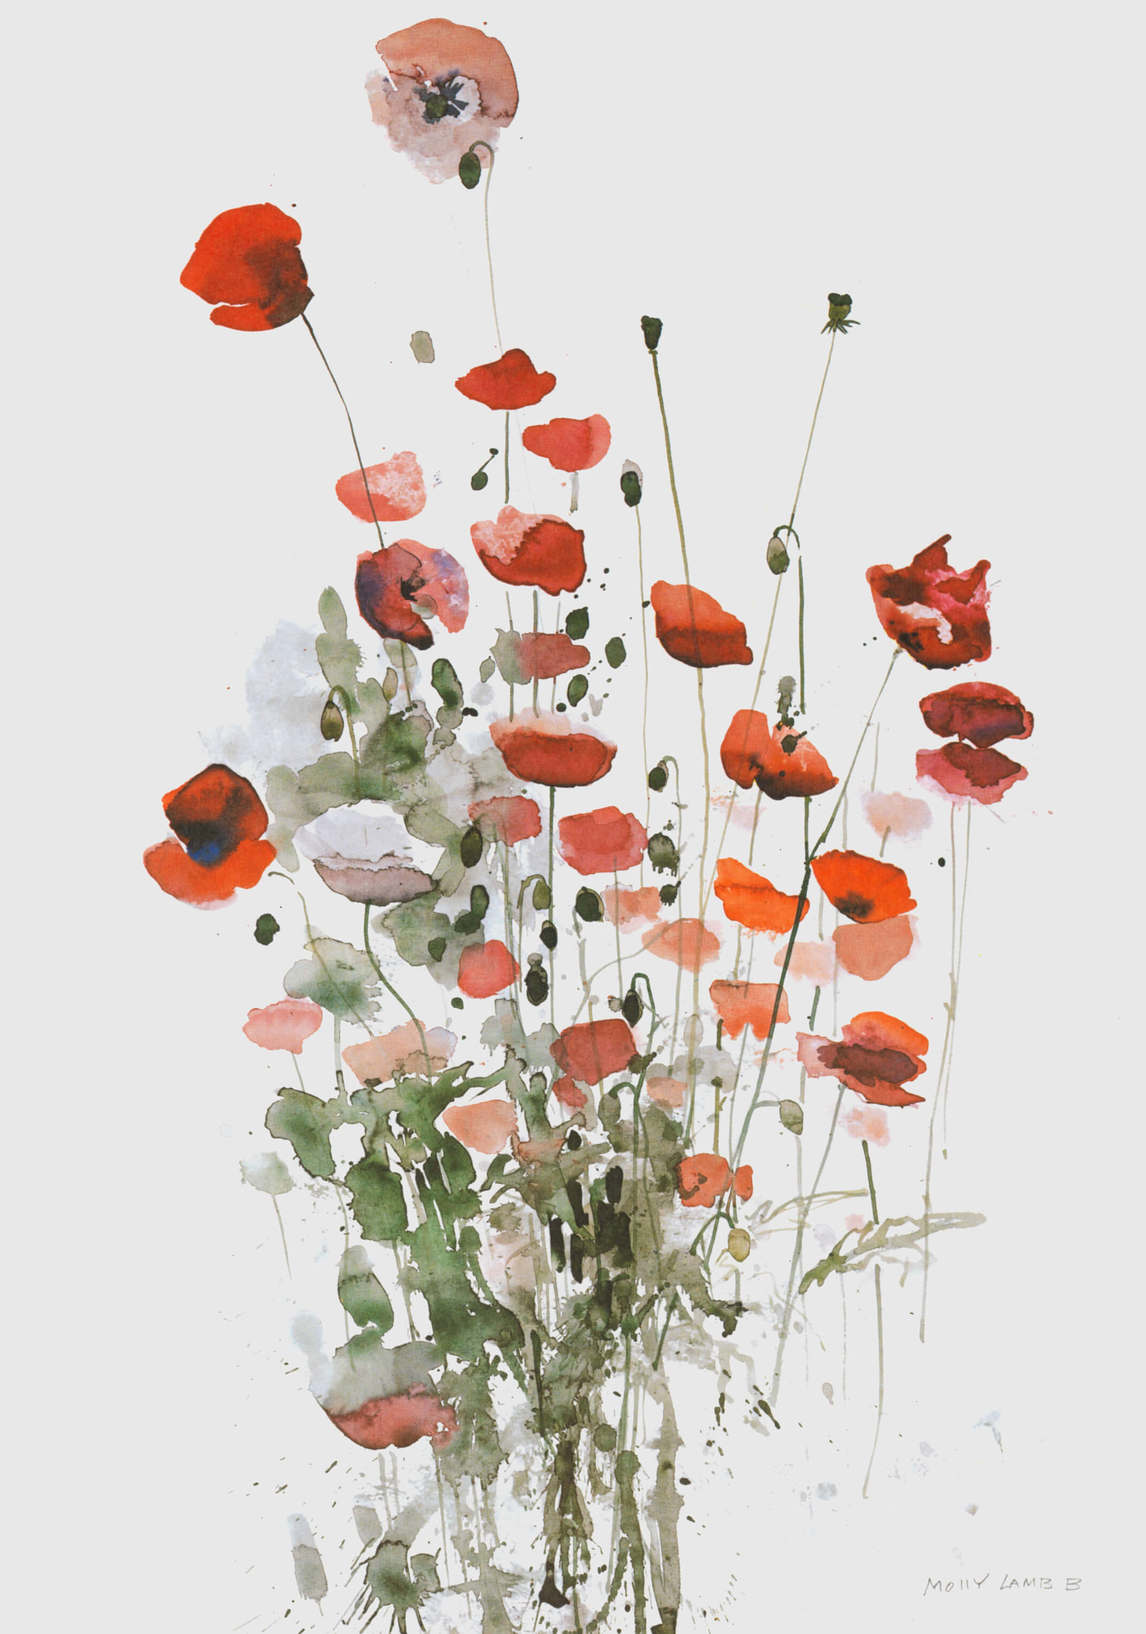 Molly Lamb Bobak, “Red Poppies,” from Wild Flowers of Canada: Impressions and Sketches of a Field Artist